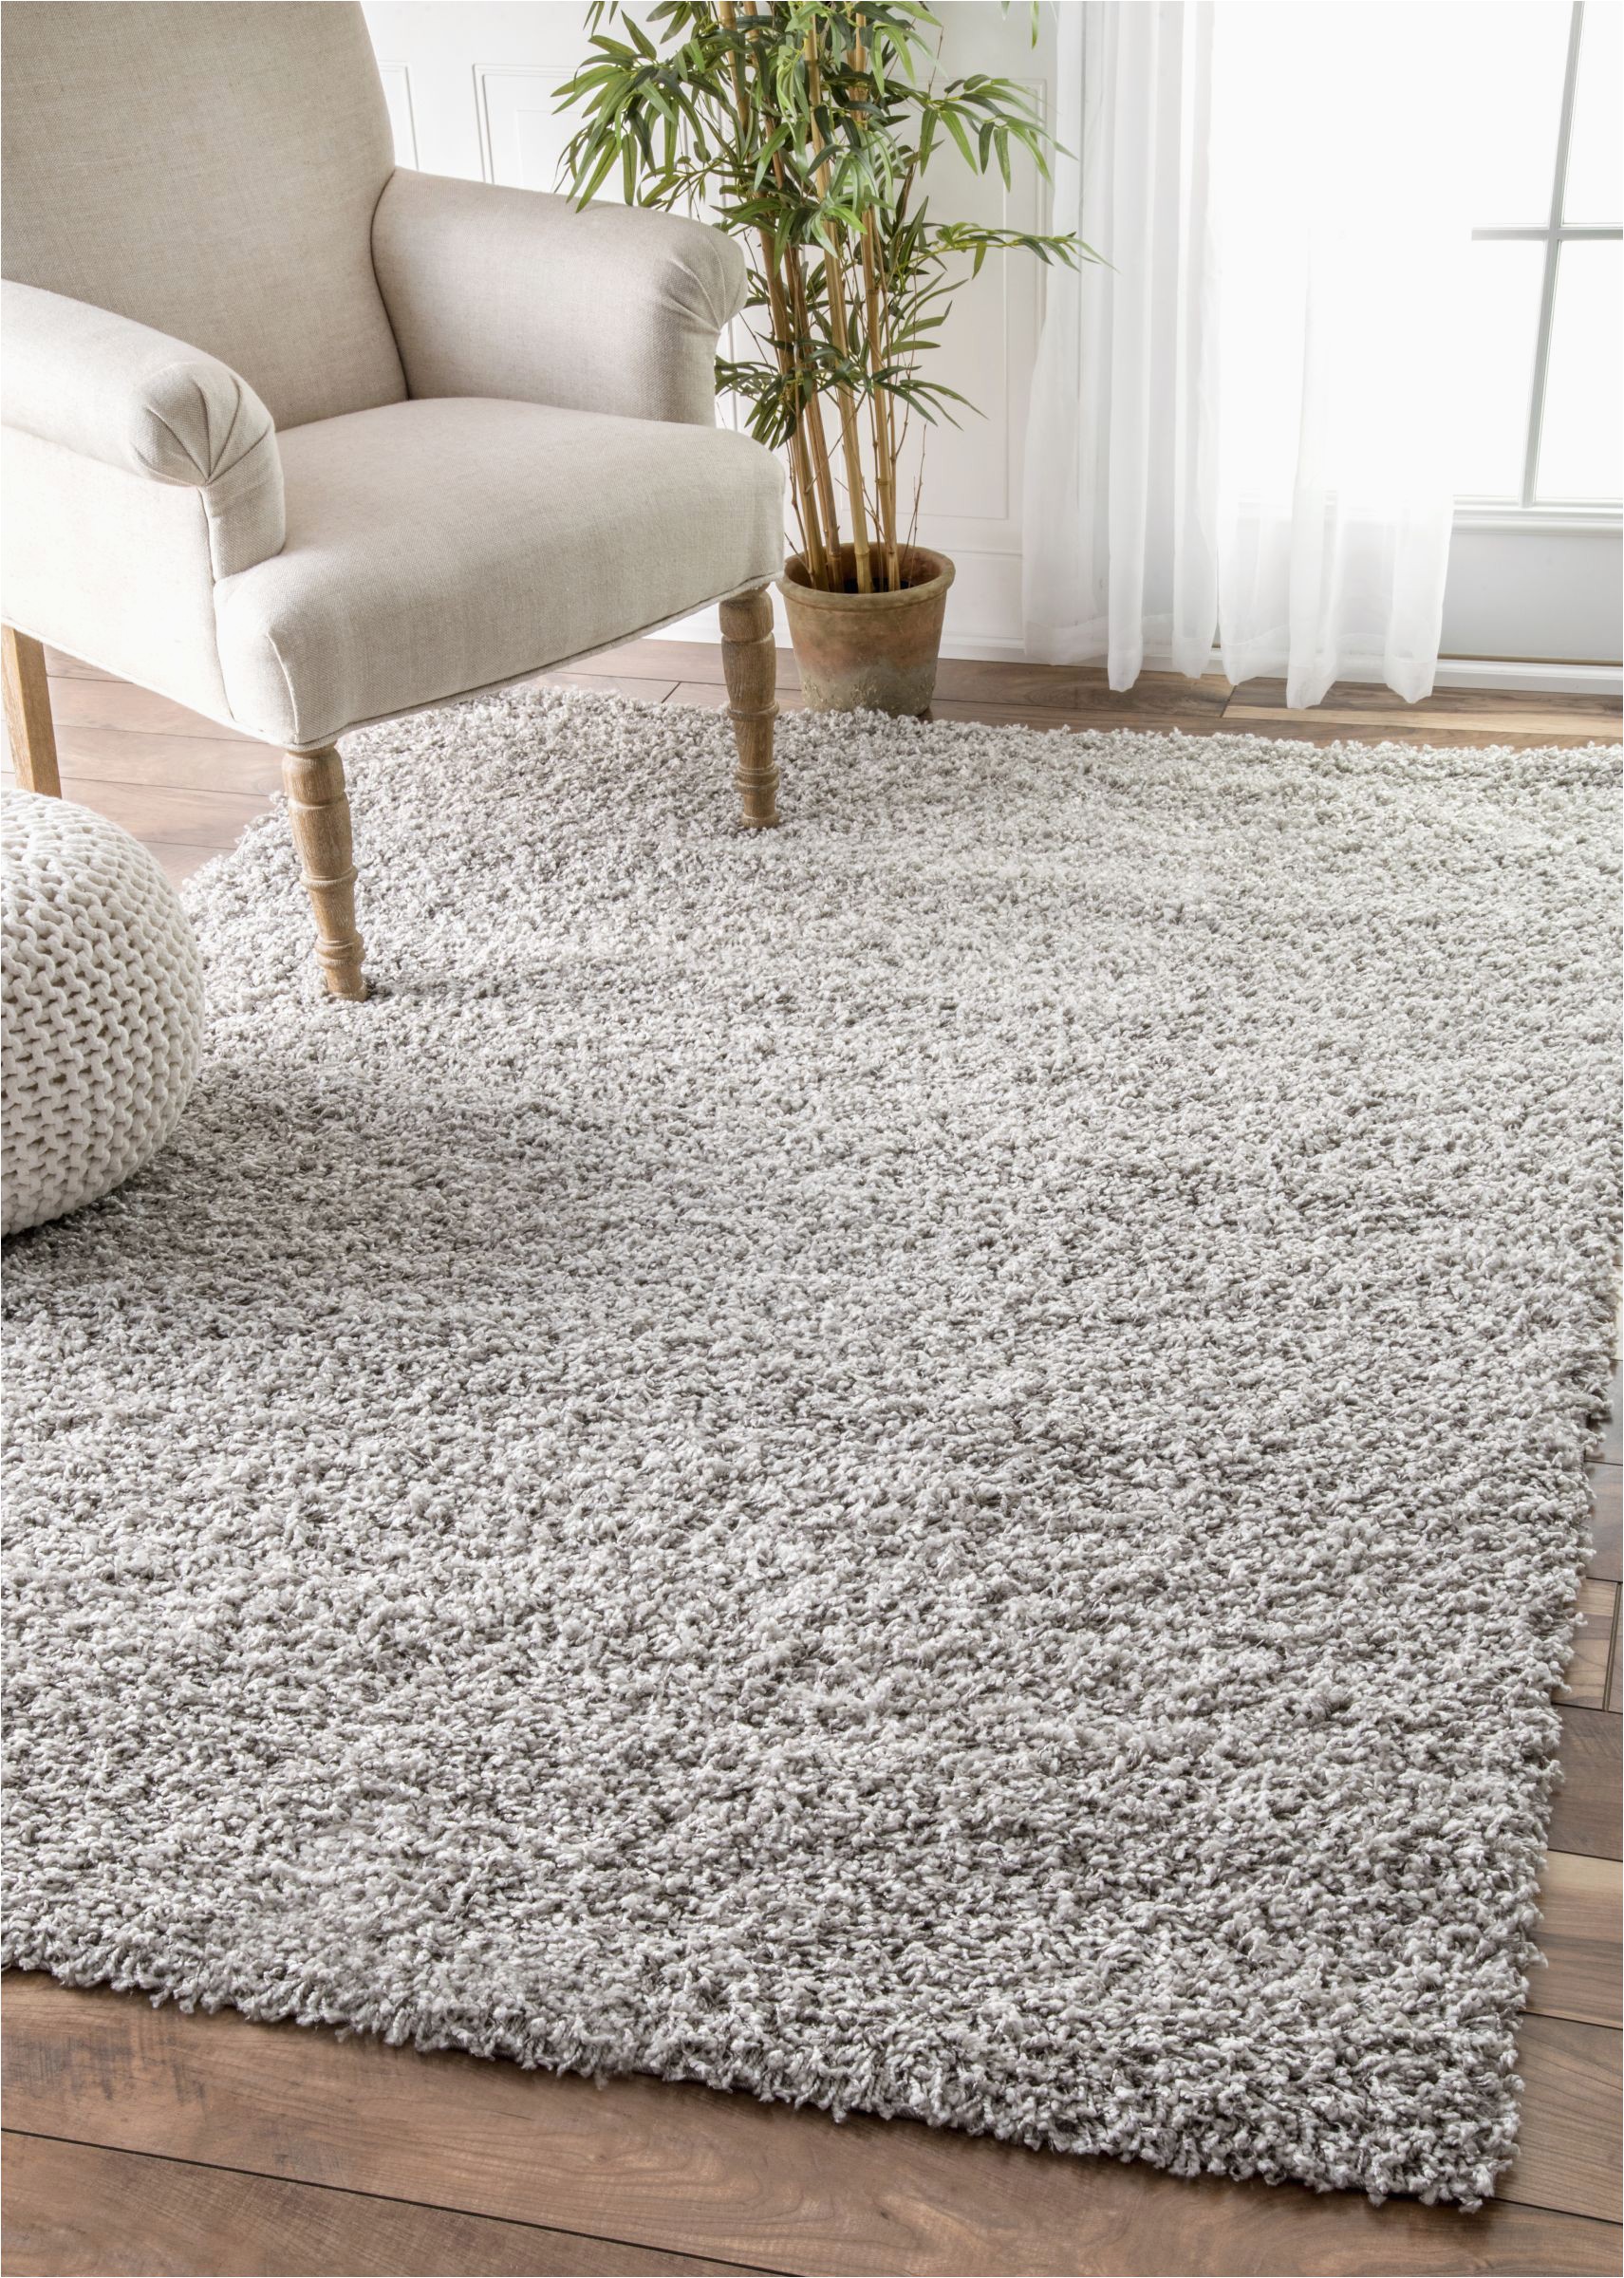 Safavieh Lavena solid Plush Shag area Rug area Rugs In Many Styles Including Contemporary Braided